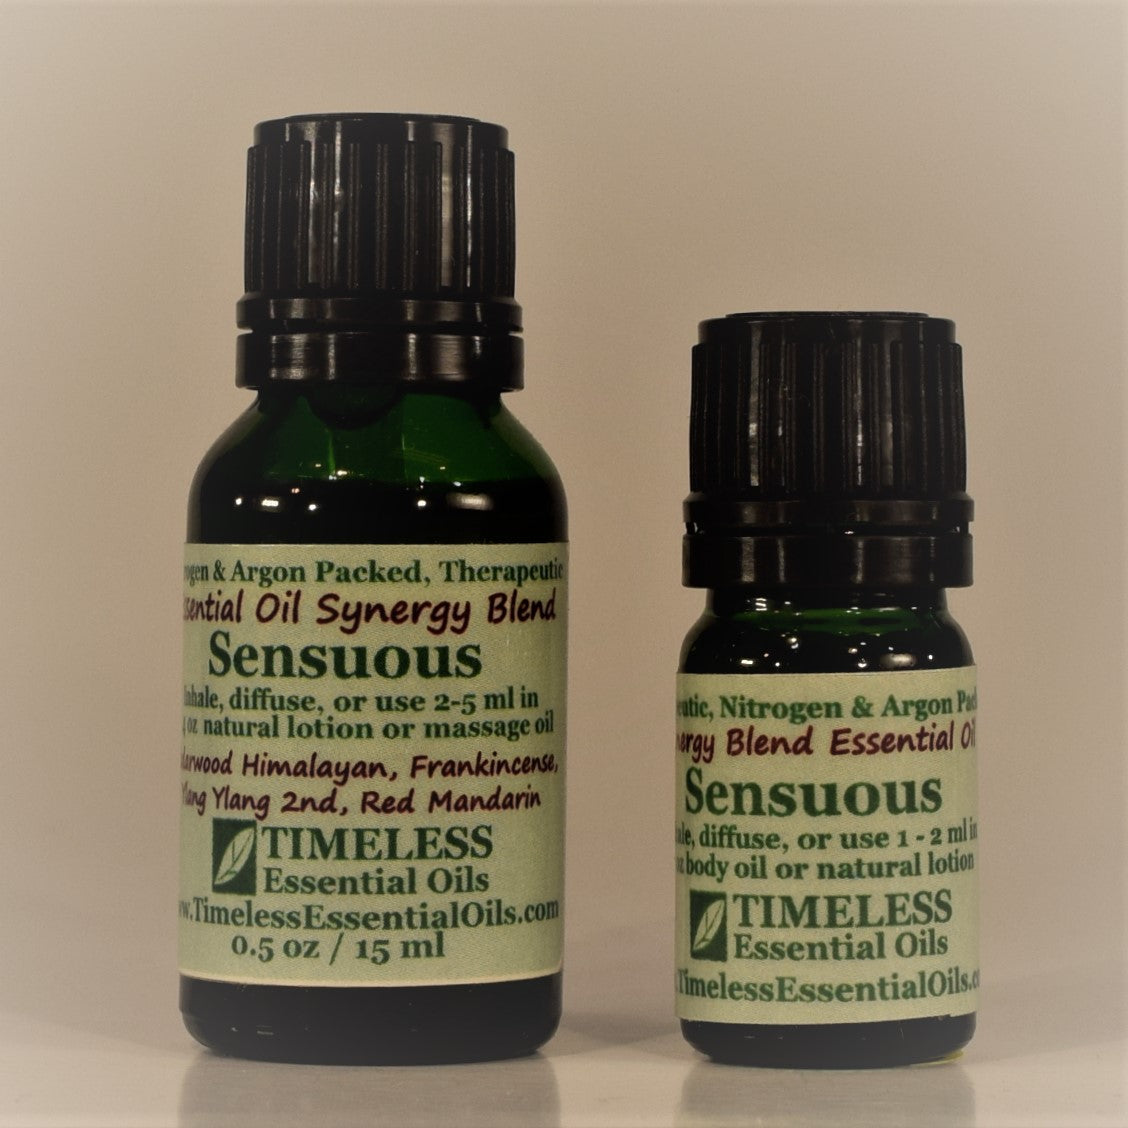 TIMELESS Essential Oils Sensuous Synergy Blend promotes exploration of the sensual self and helps connect with others on a physical and emotional level.